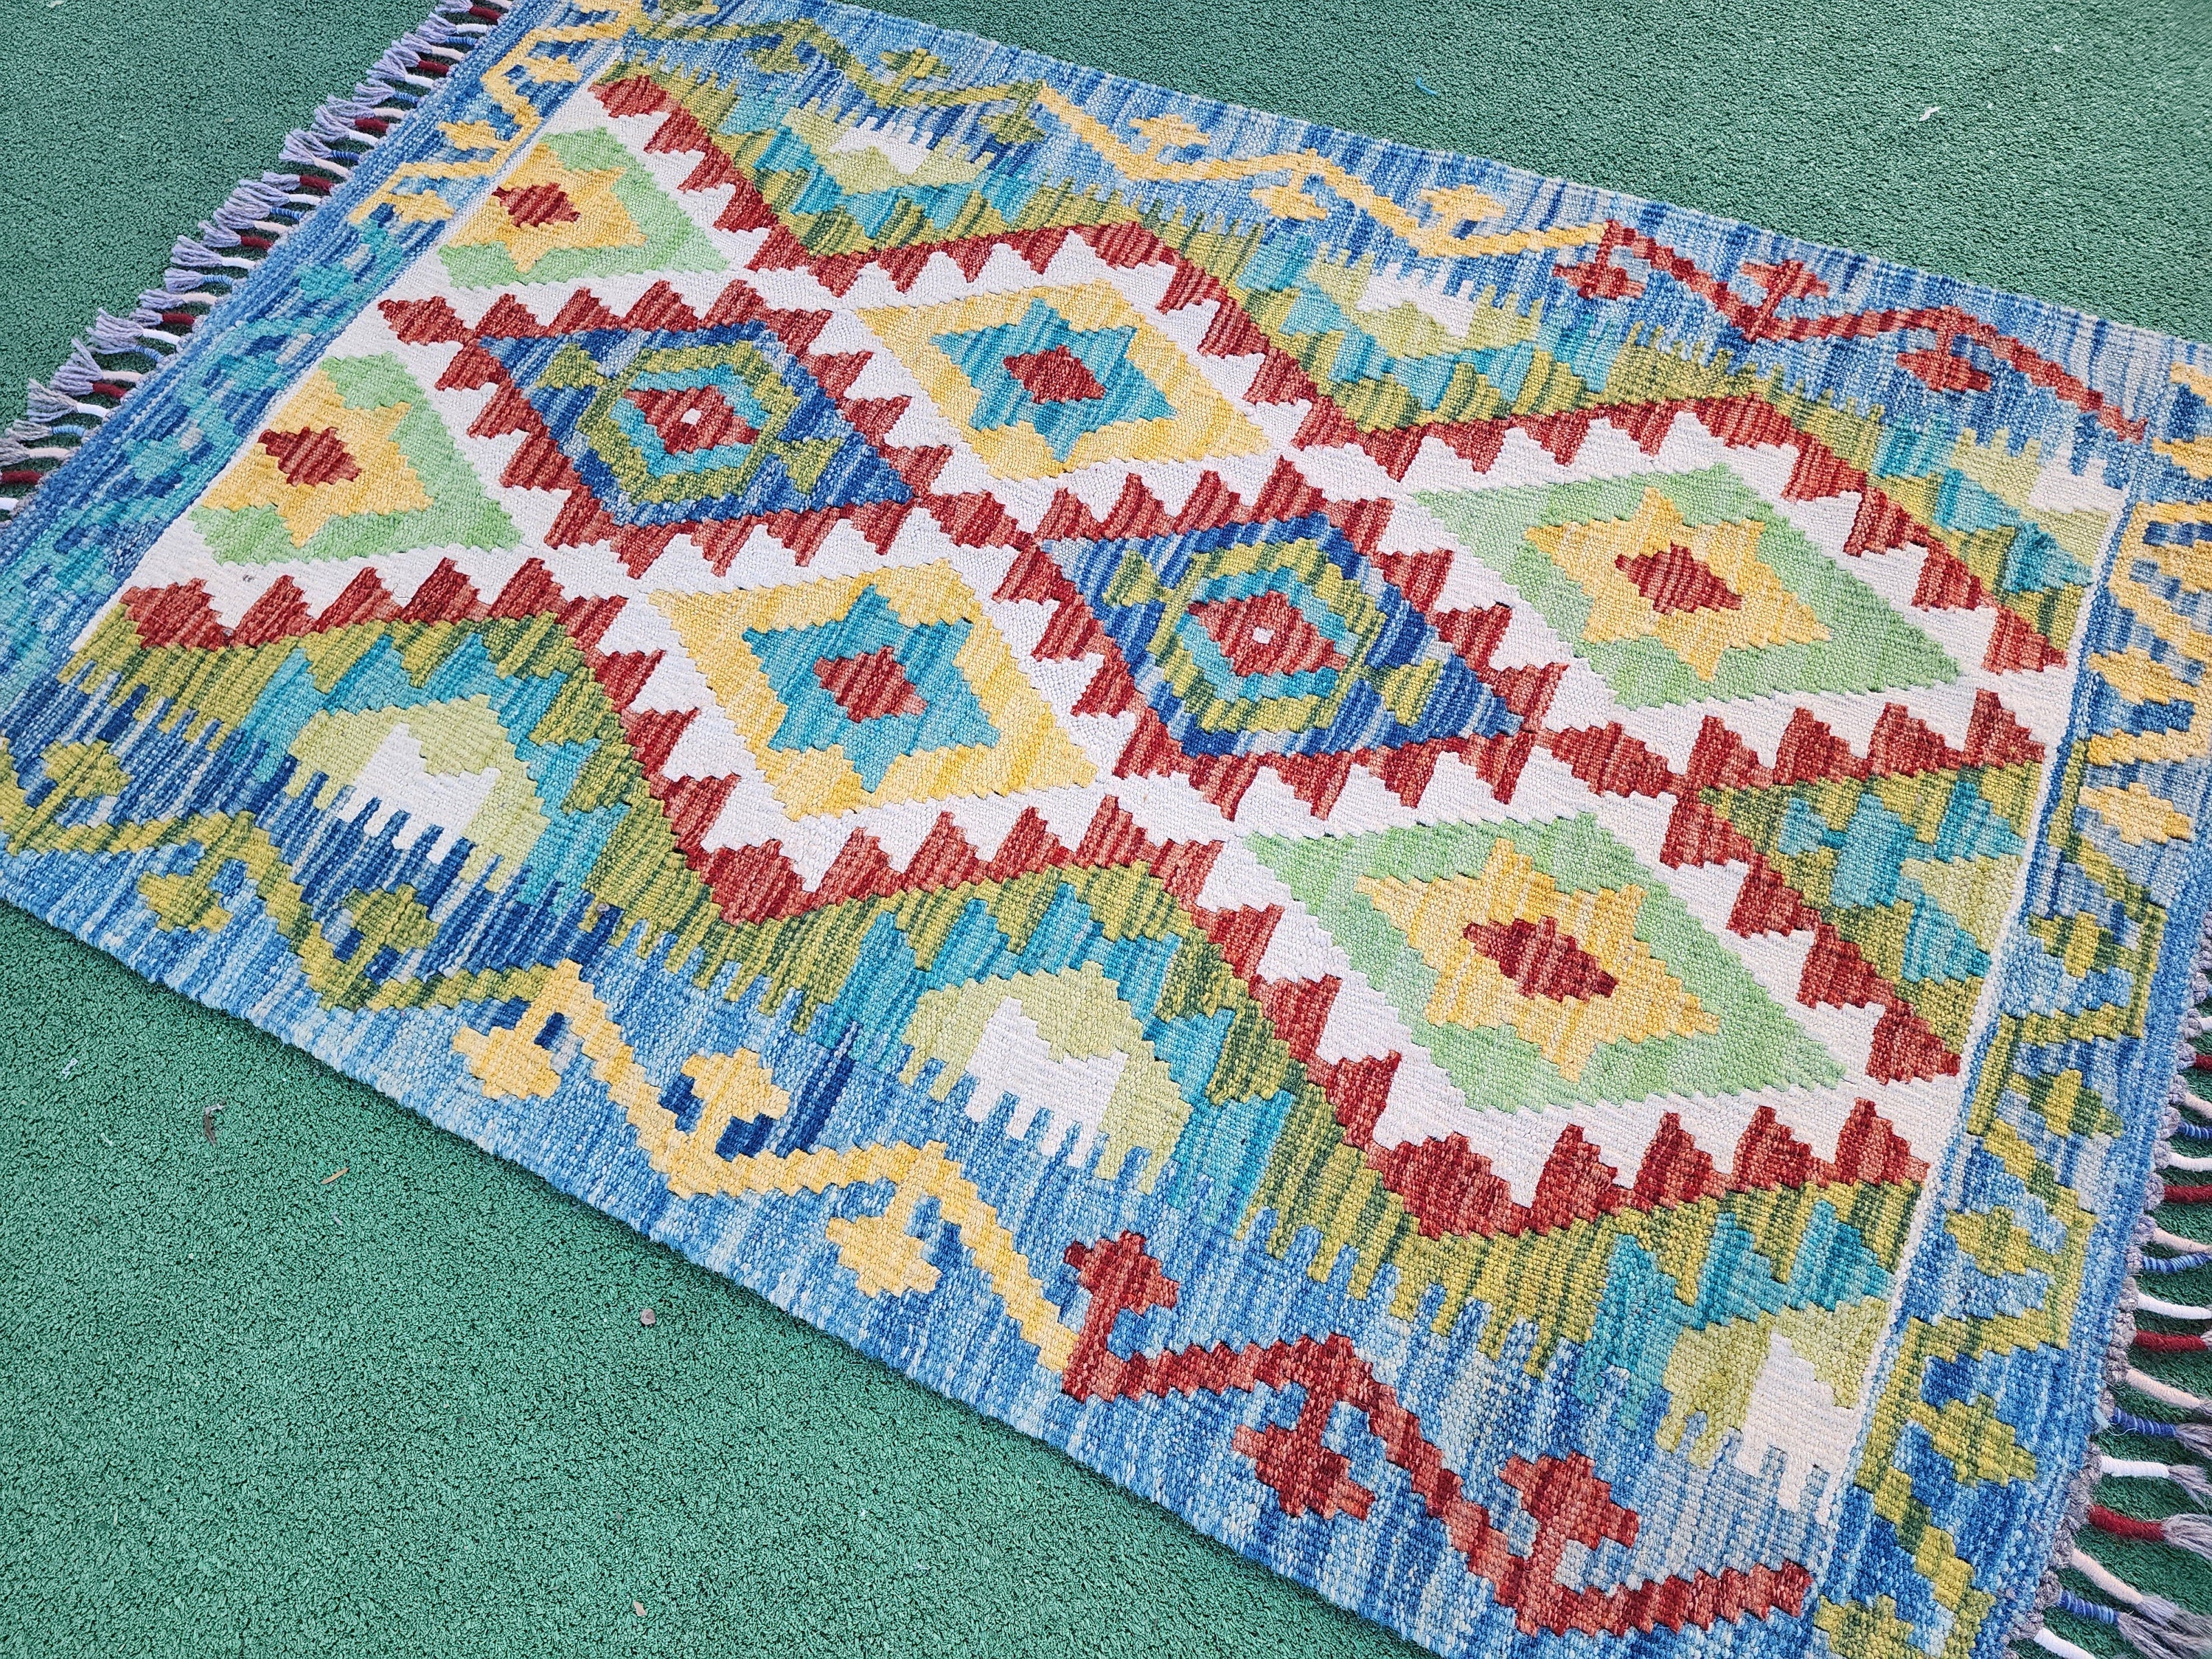 Afghan Kilim Vintage Rug 3 ft 9 in x 2 ft 6 in, Rust Red, Blue and Off-White Turkish Rug